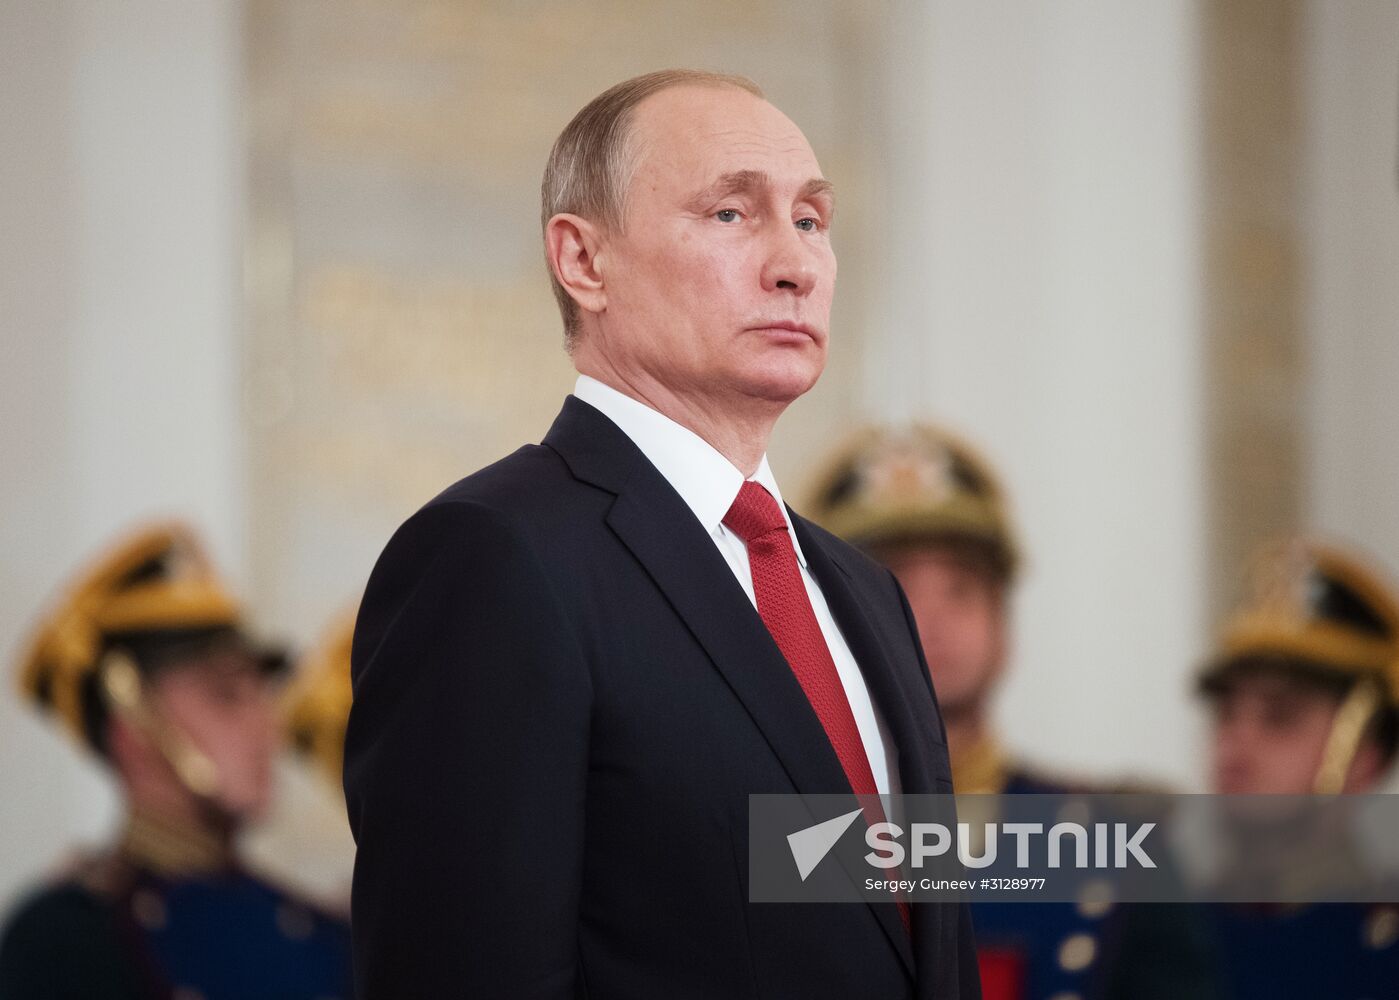 Presentation of Russian Federation National Awards by President Vladimir Putin on Russia Day